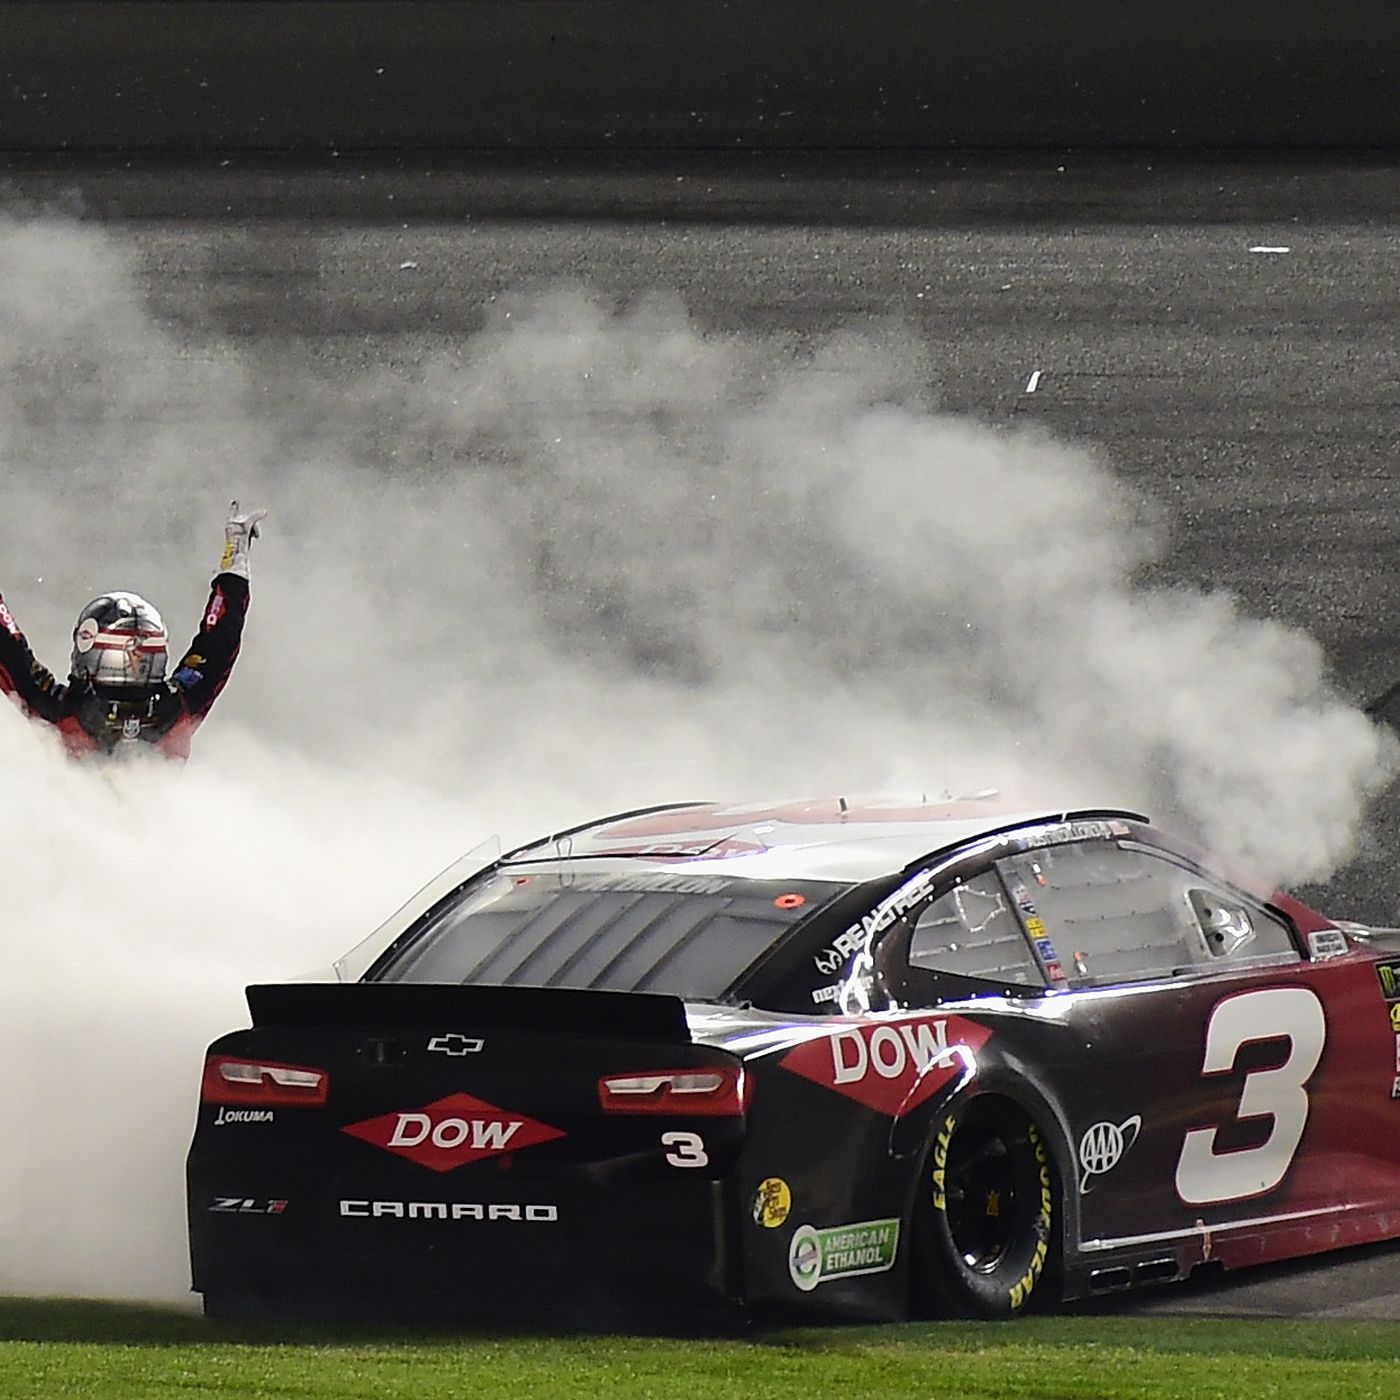 The No. 3 car wins the Daytona 500, a victory Dale Earnhardt would